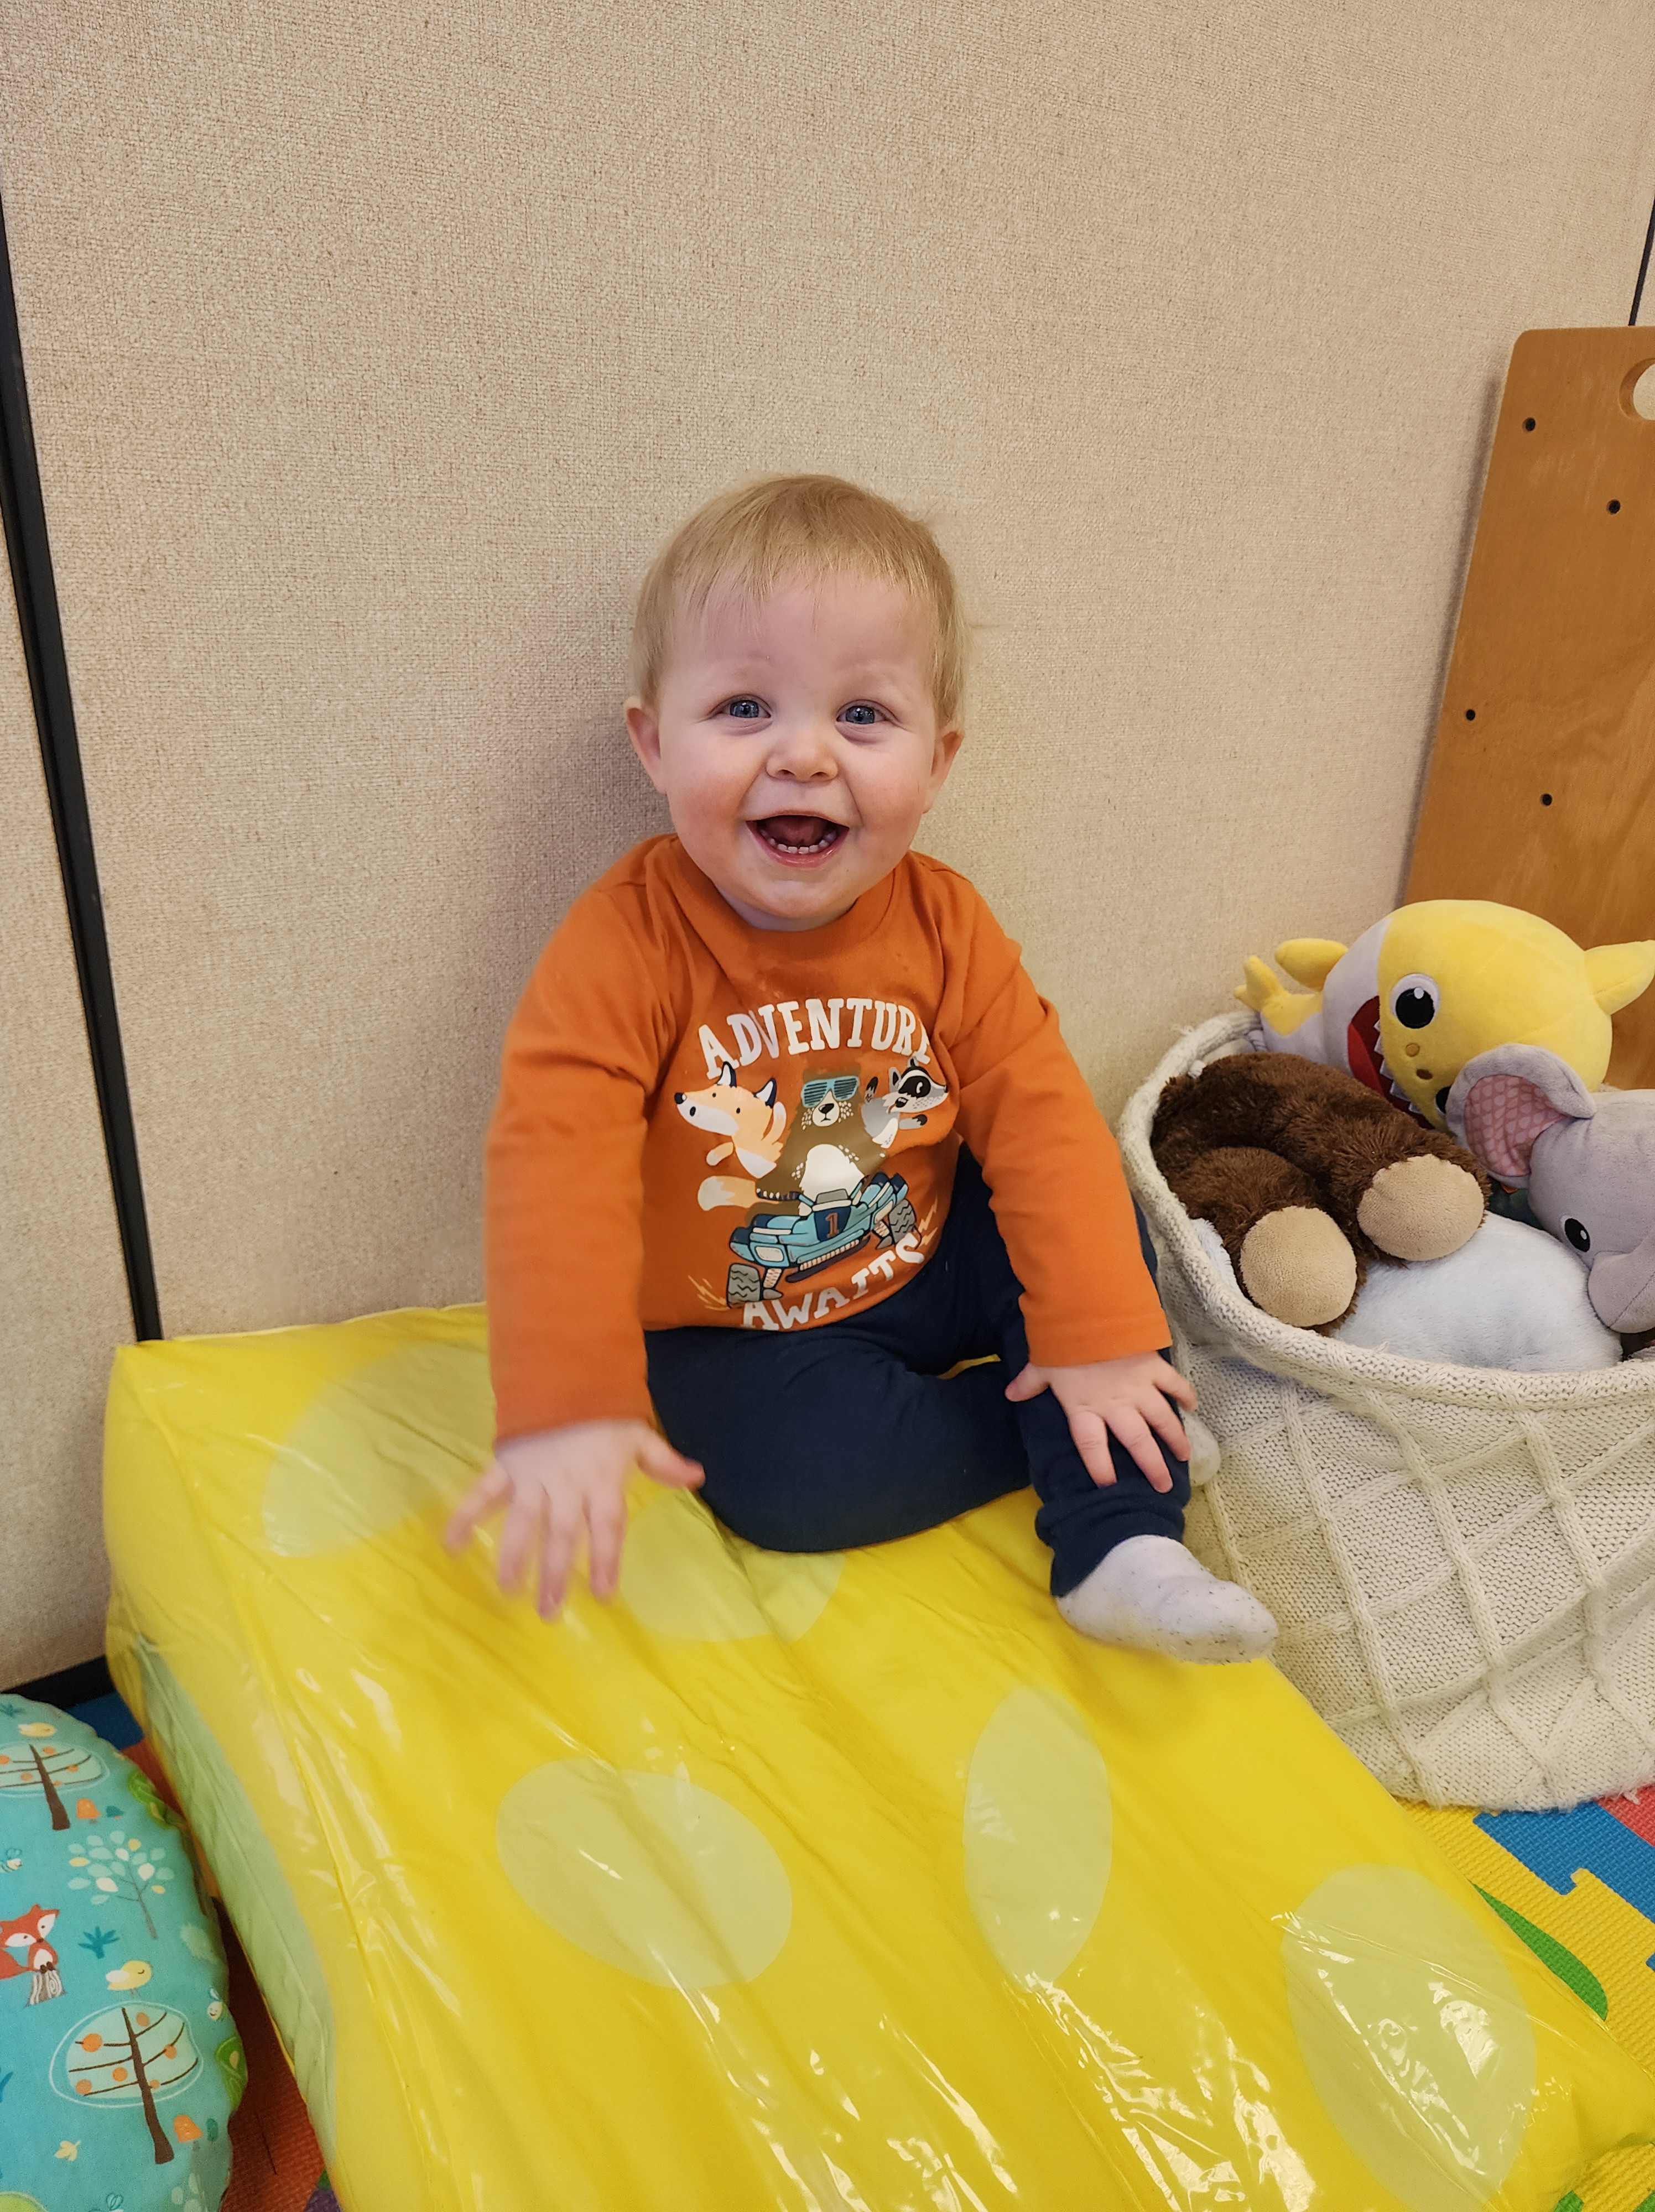 A young child sits in a playroom smiling